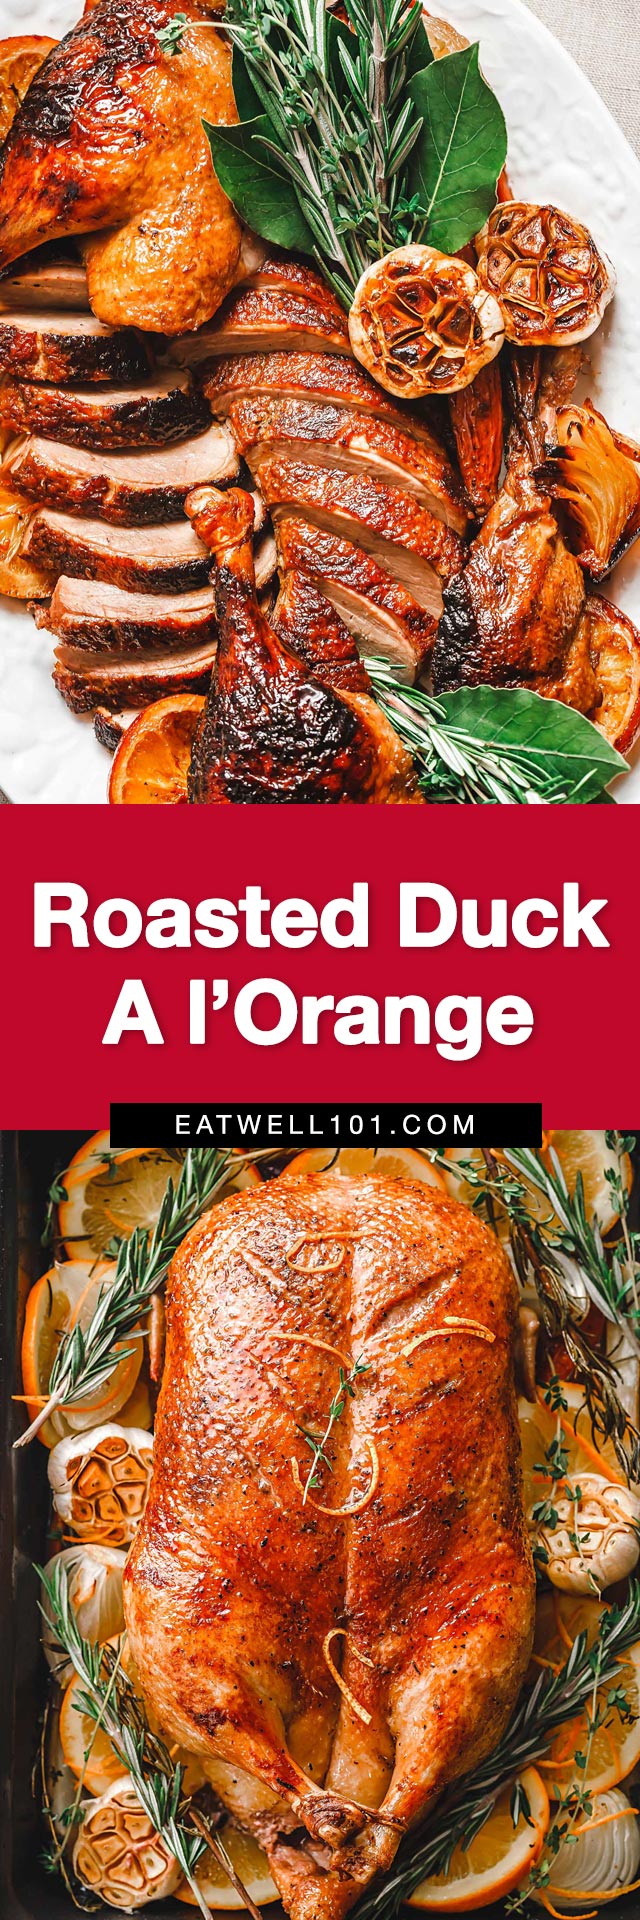 Roasted duck a l'orange - #duck #orange #recpie #eatwell101 - The crispiest skin and best flavor, with an incredible savory-sweet orange sauce. This orange duck recipe is perfect for a memorable holiday dinner! 